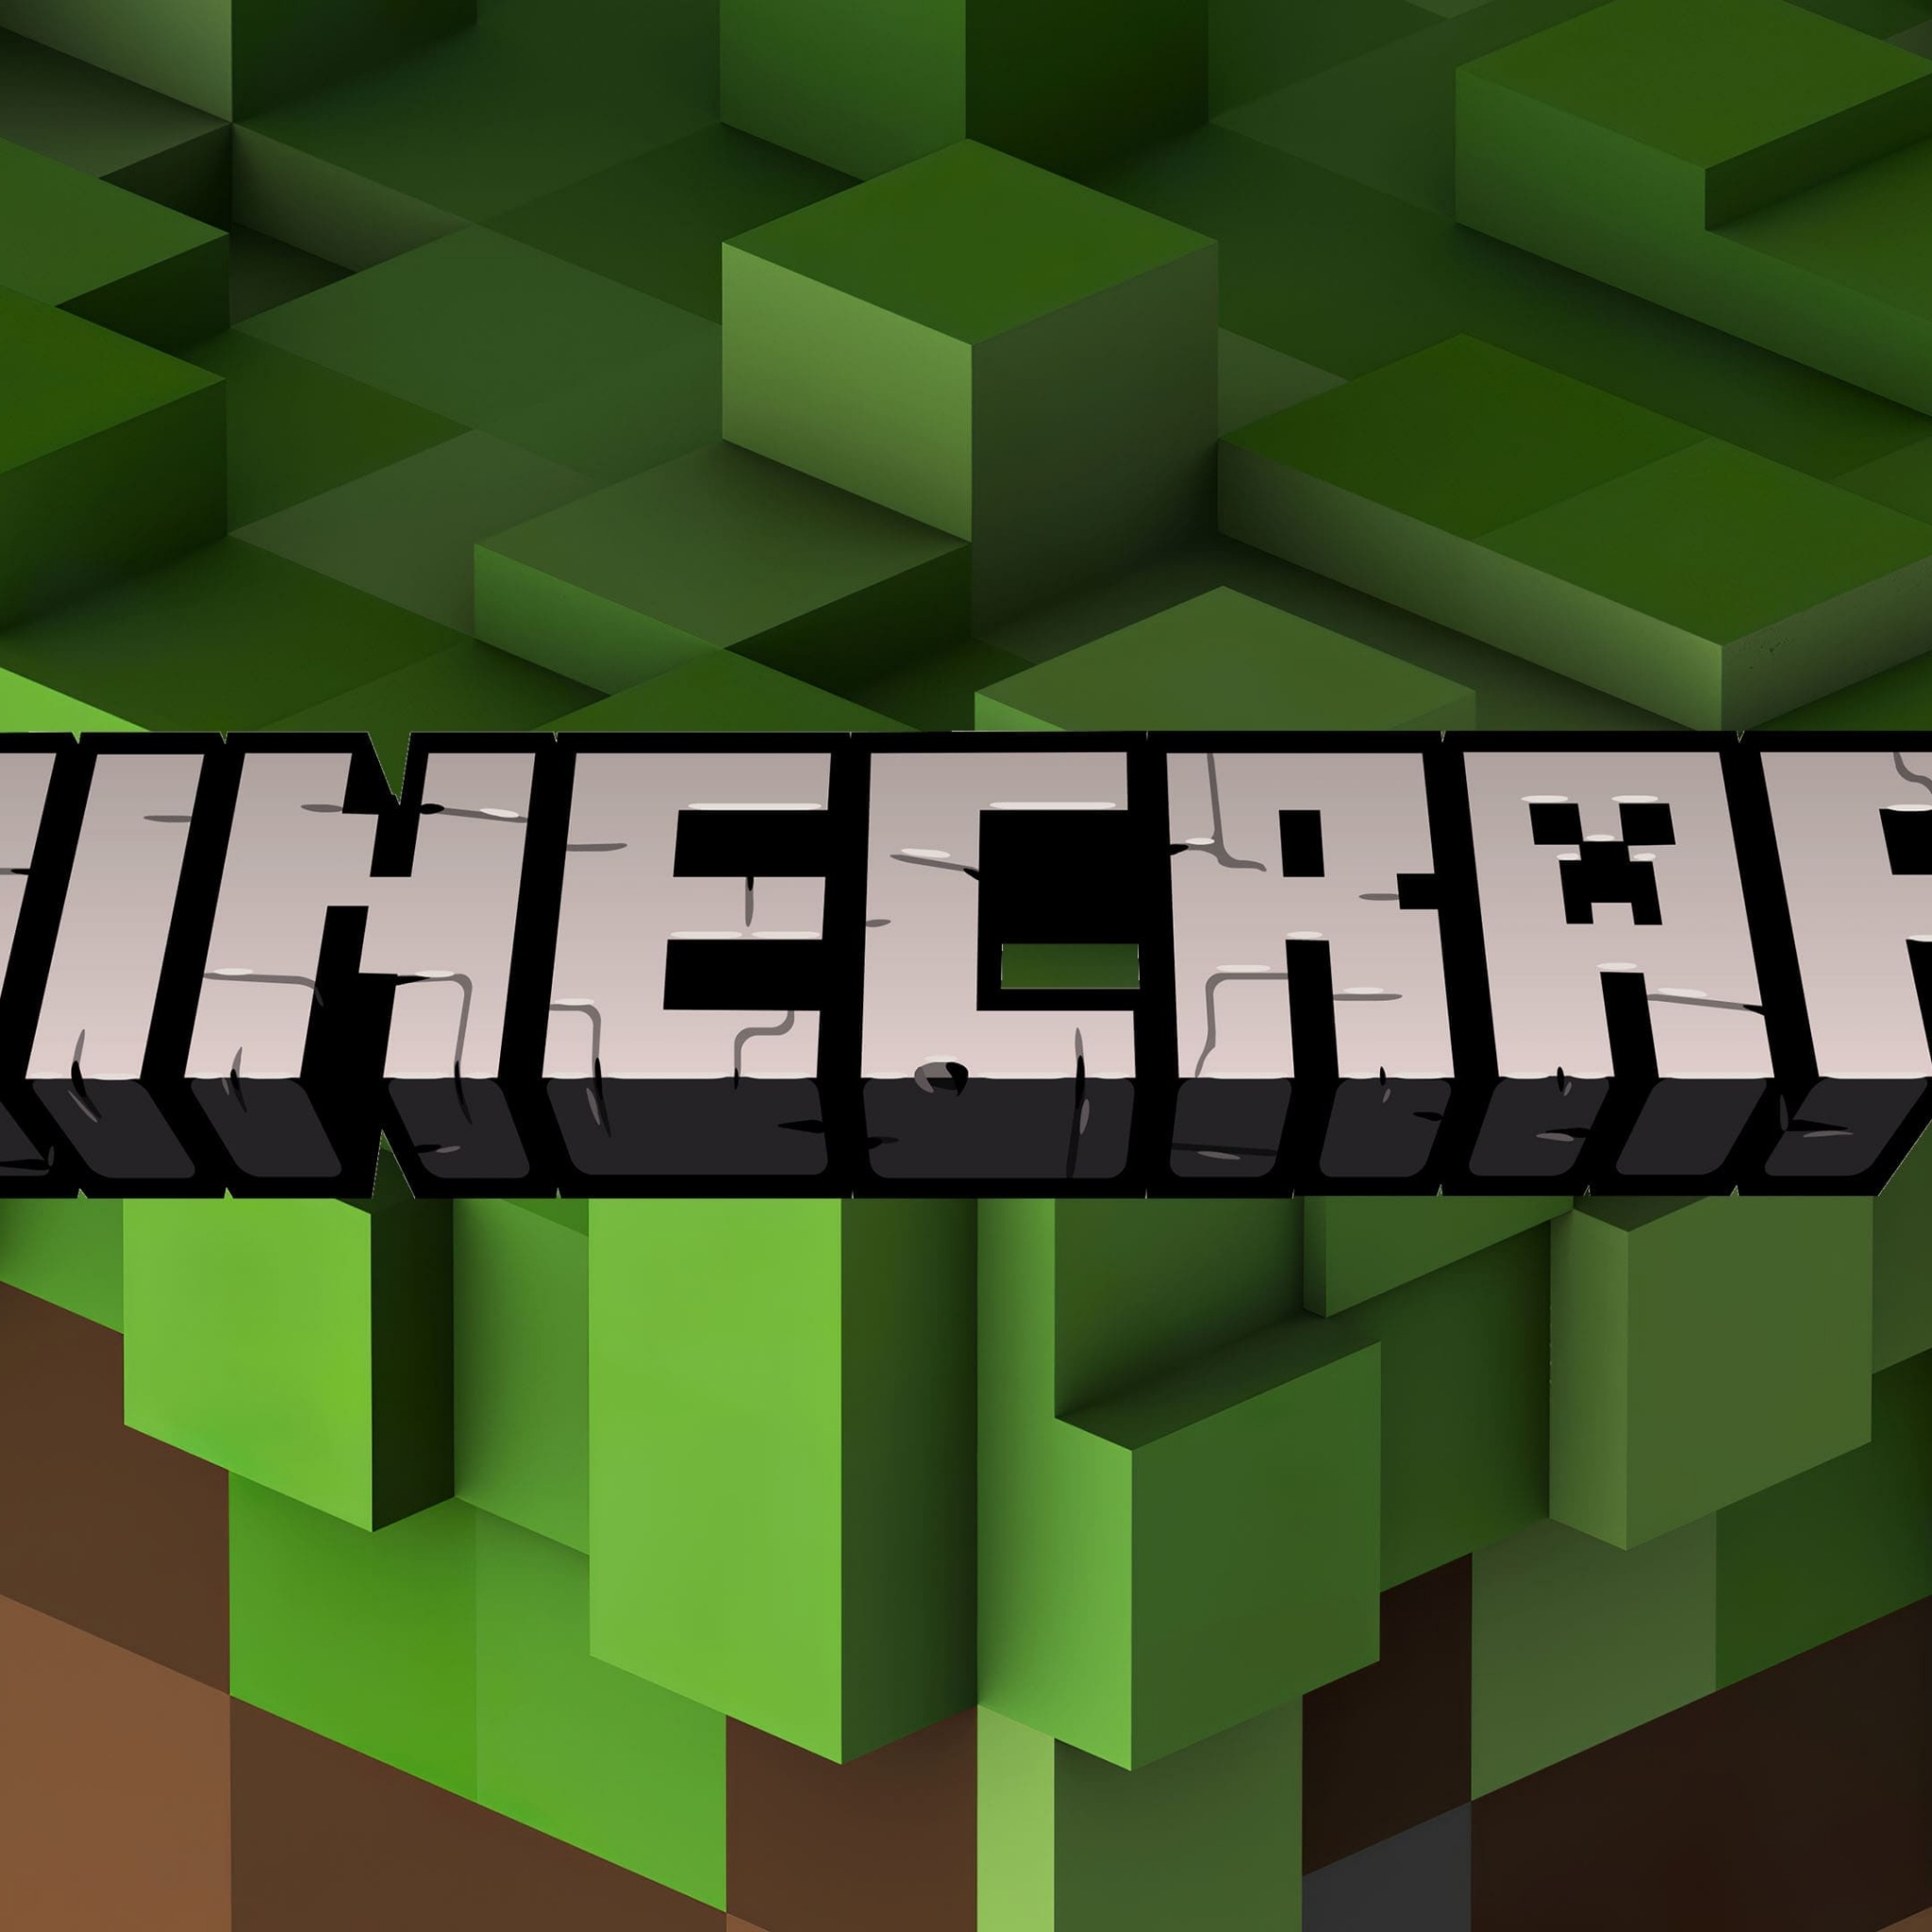 cool backgrounds hd minecraft